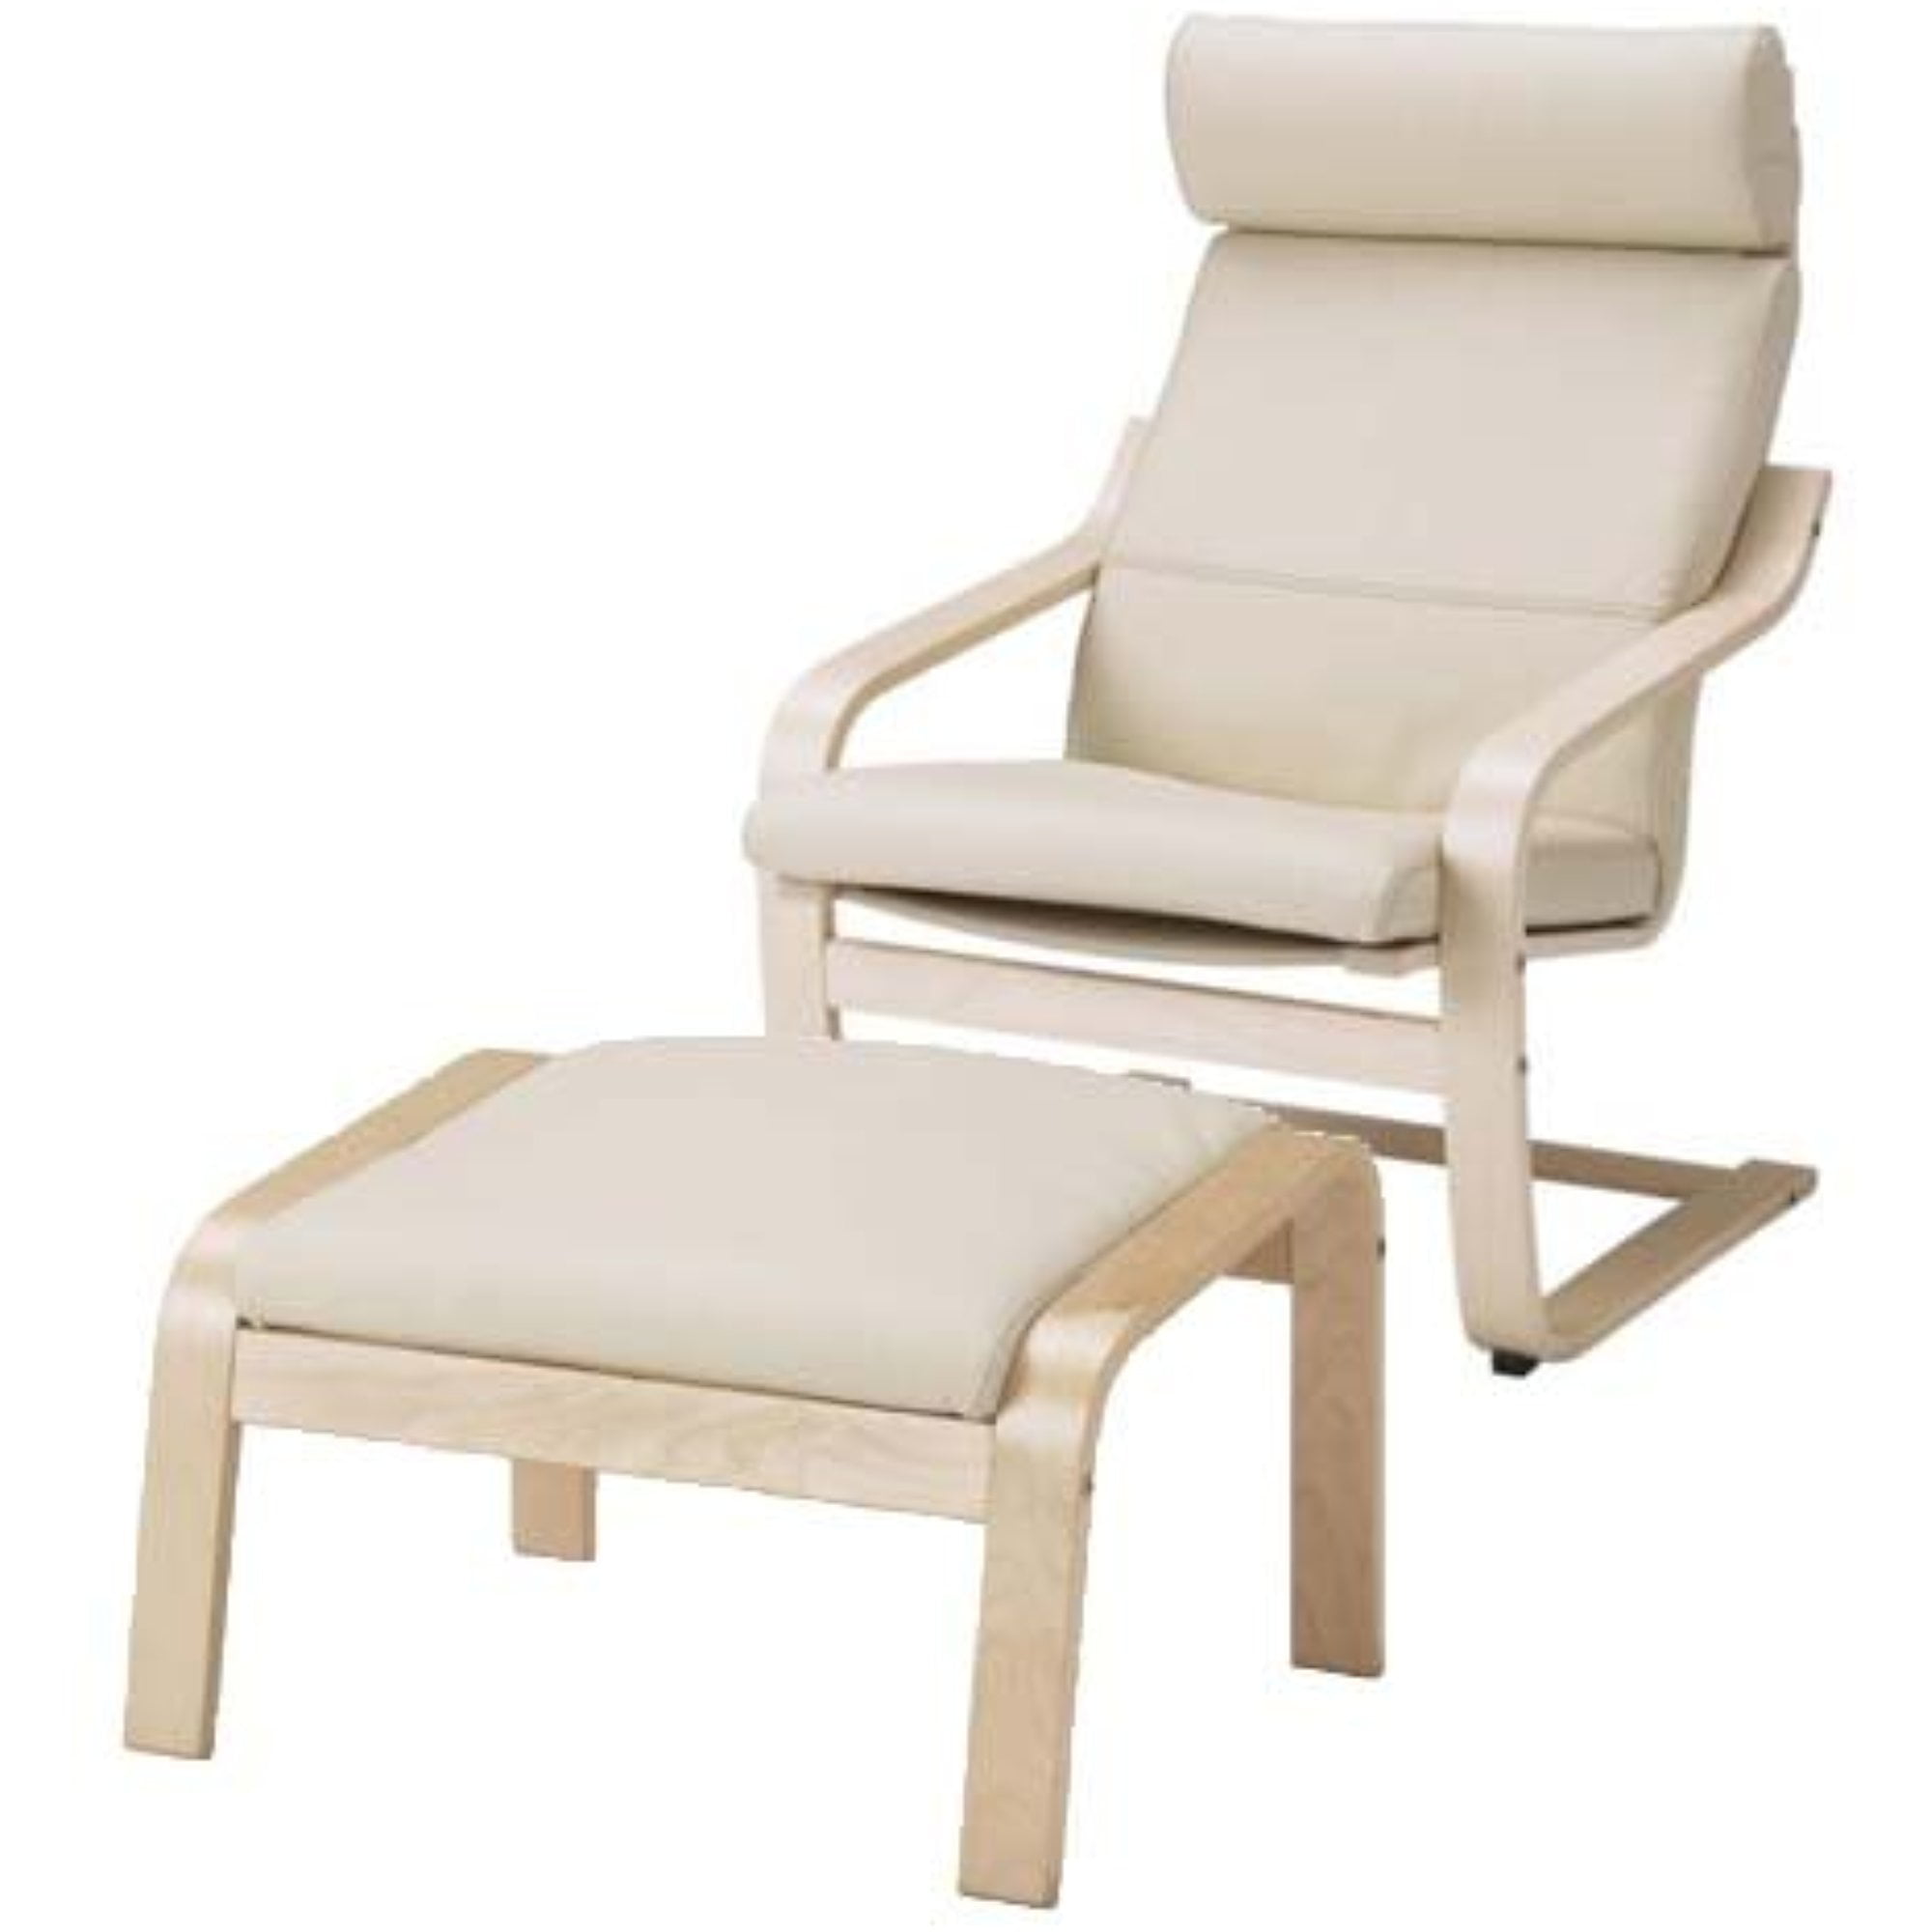 Ikea Poang Chair Armchair and Footstool Set with Off-white Leather